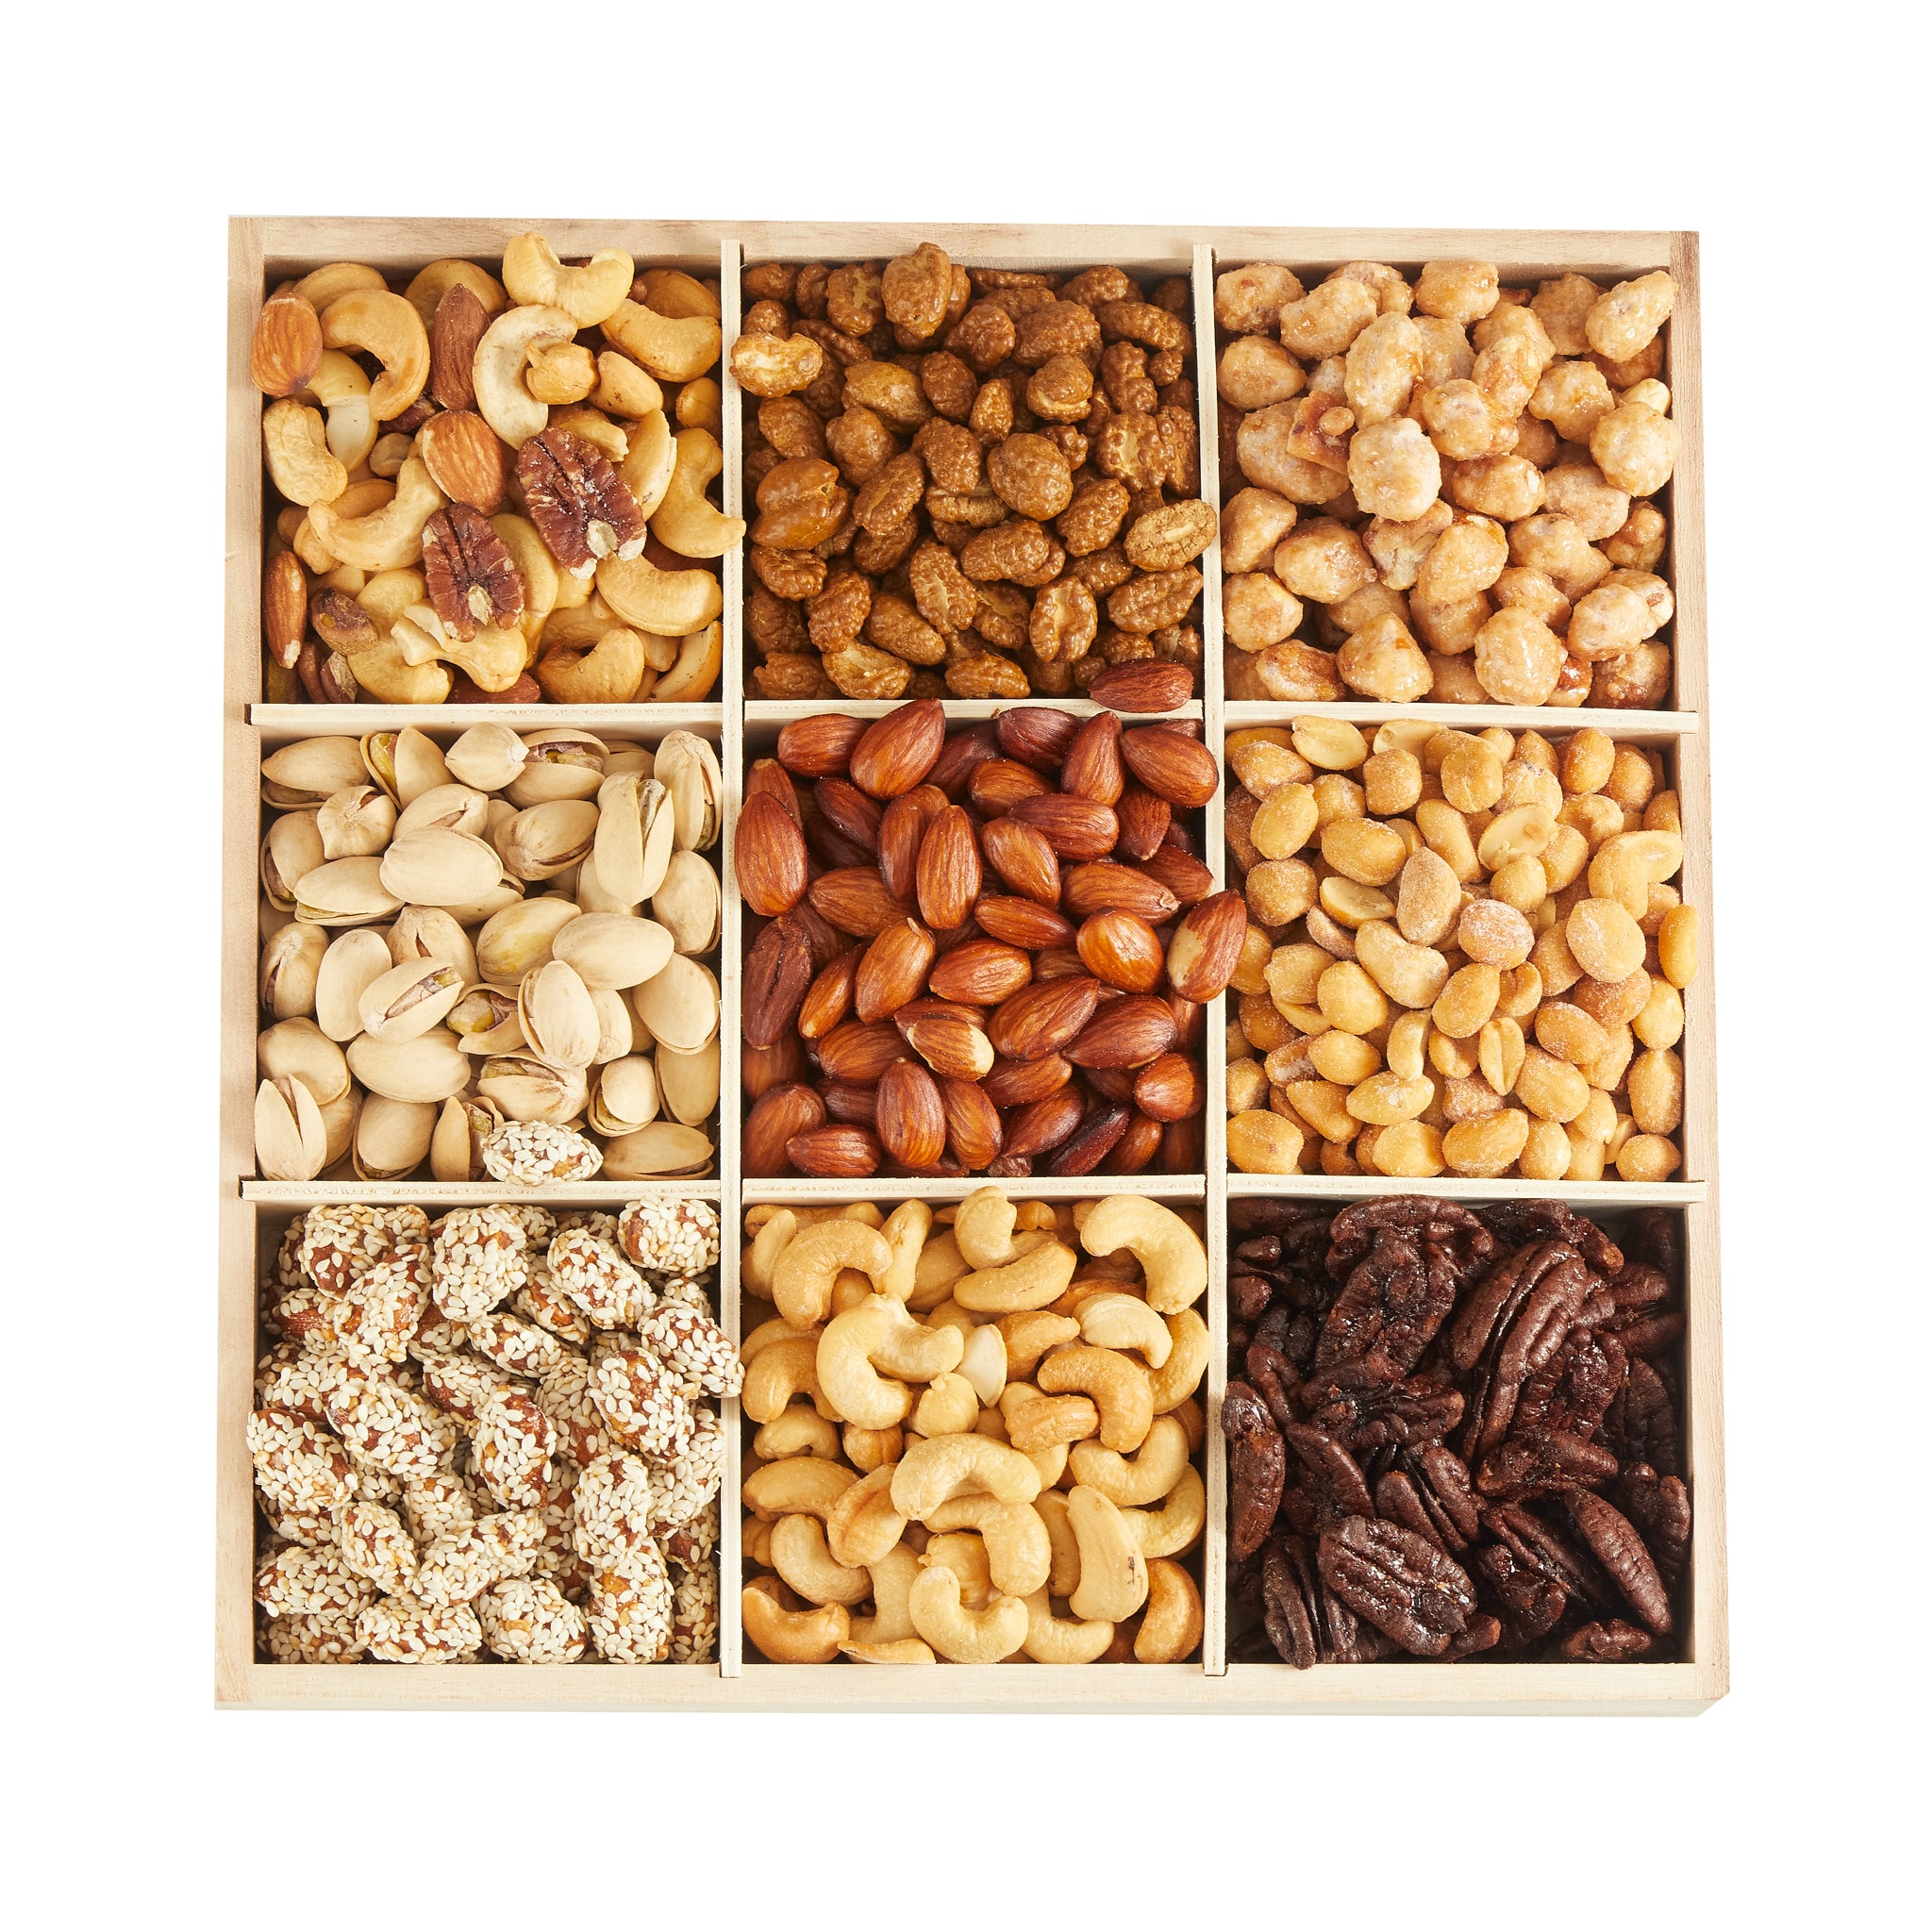 Exquisite Assortment of Dried Fruits and Nuts